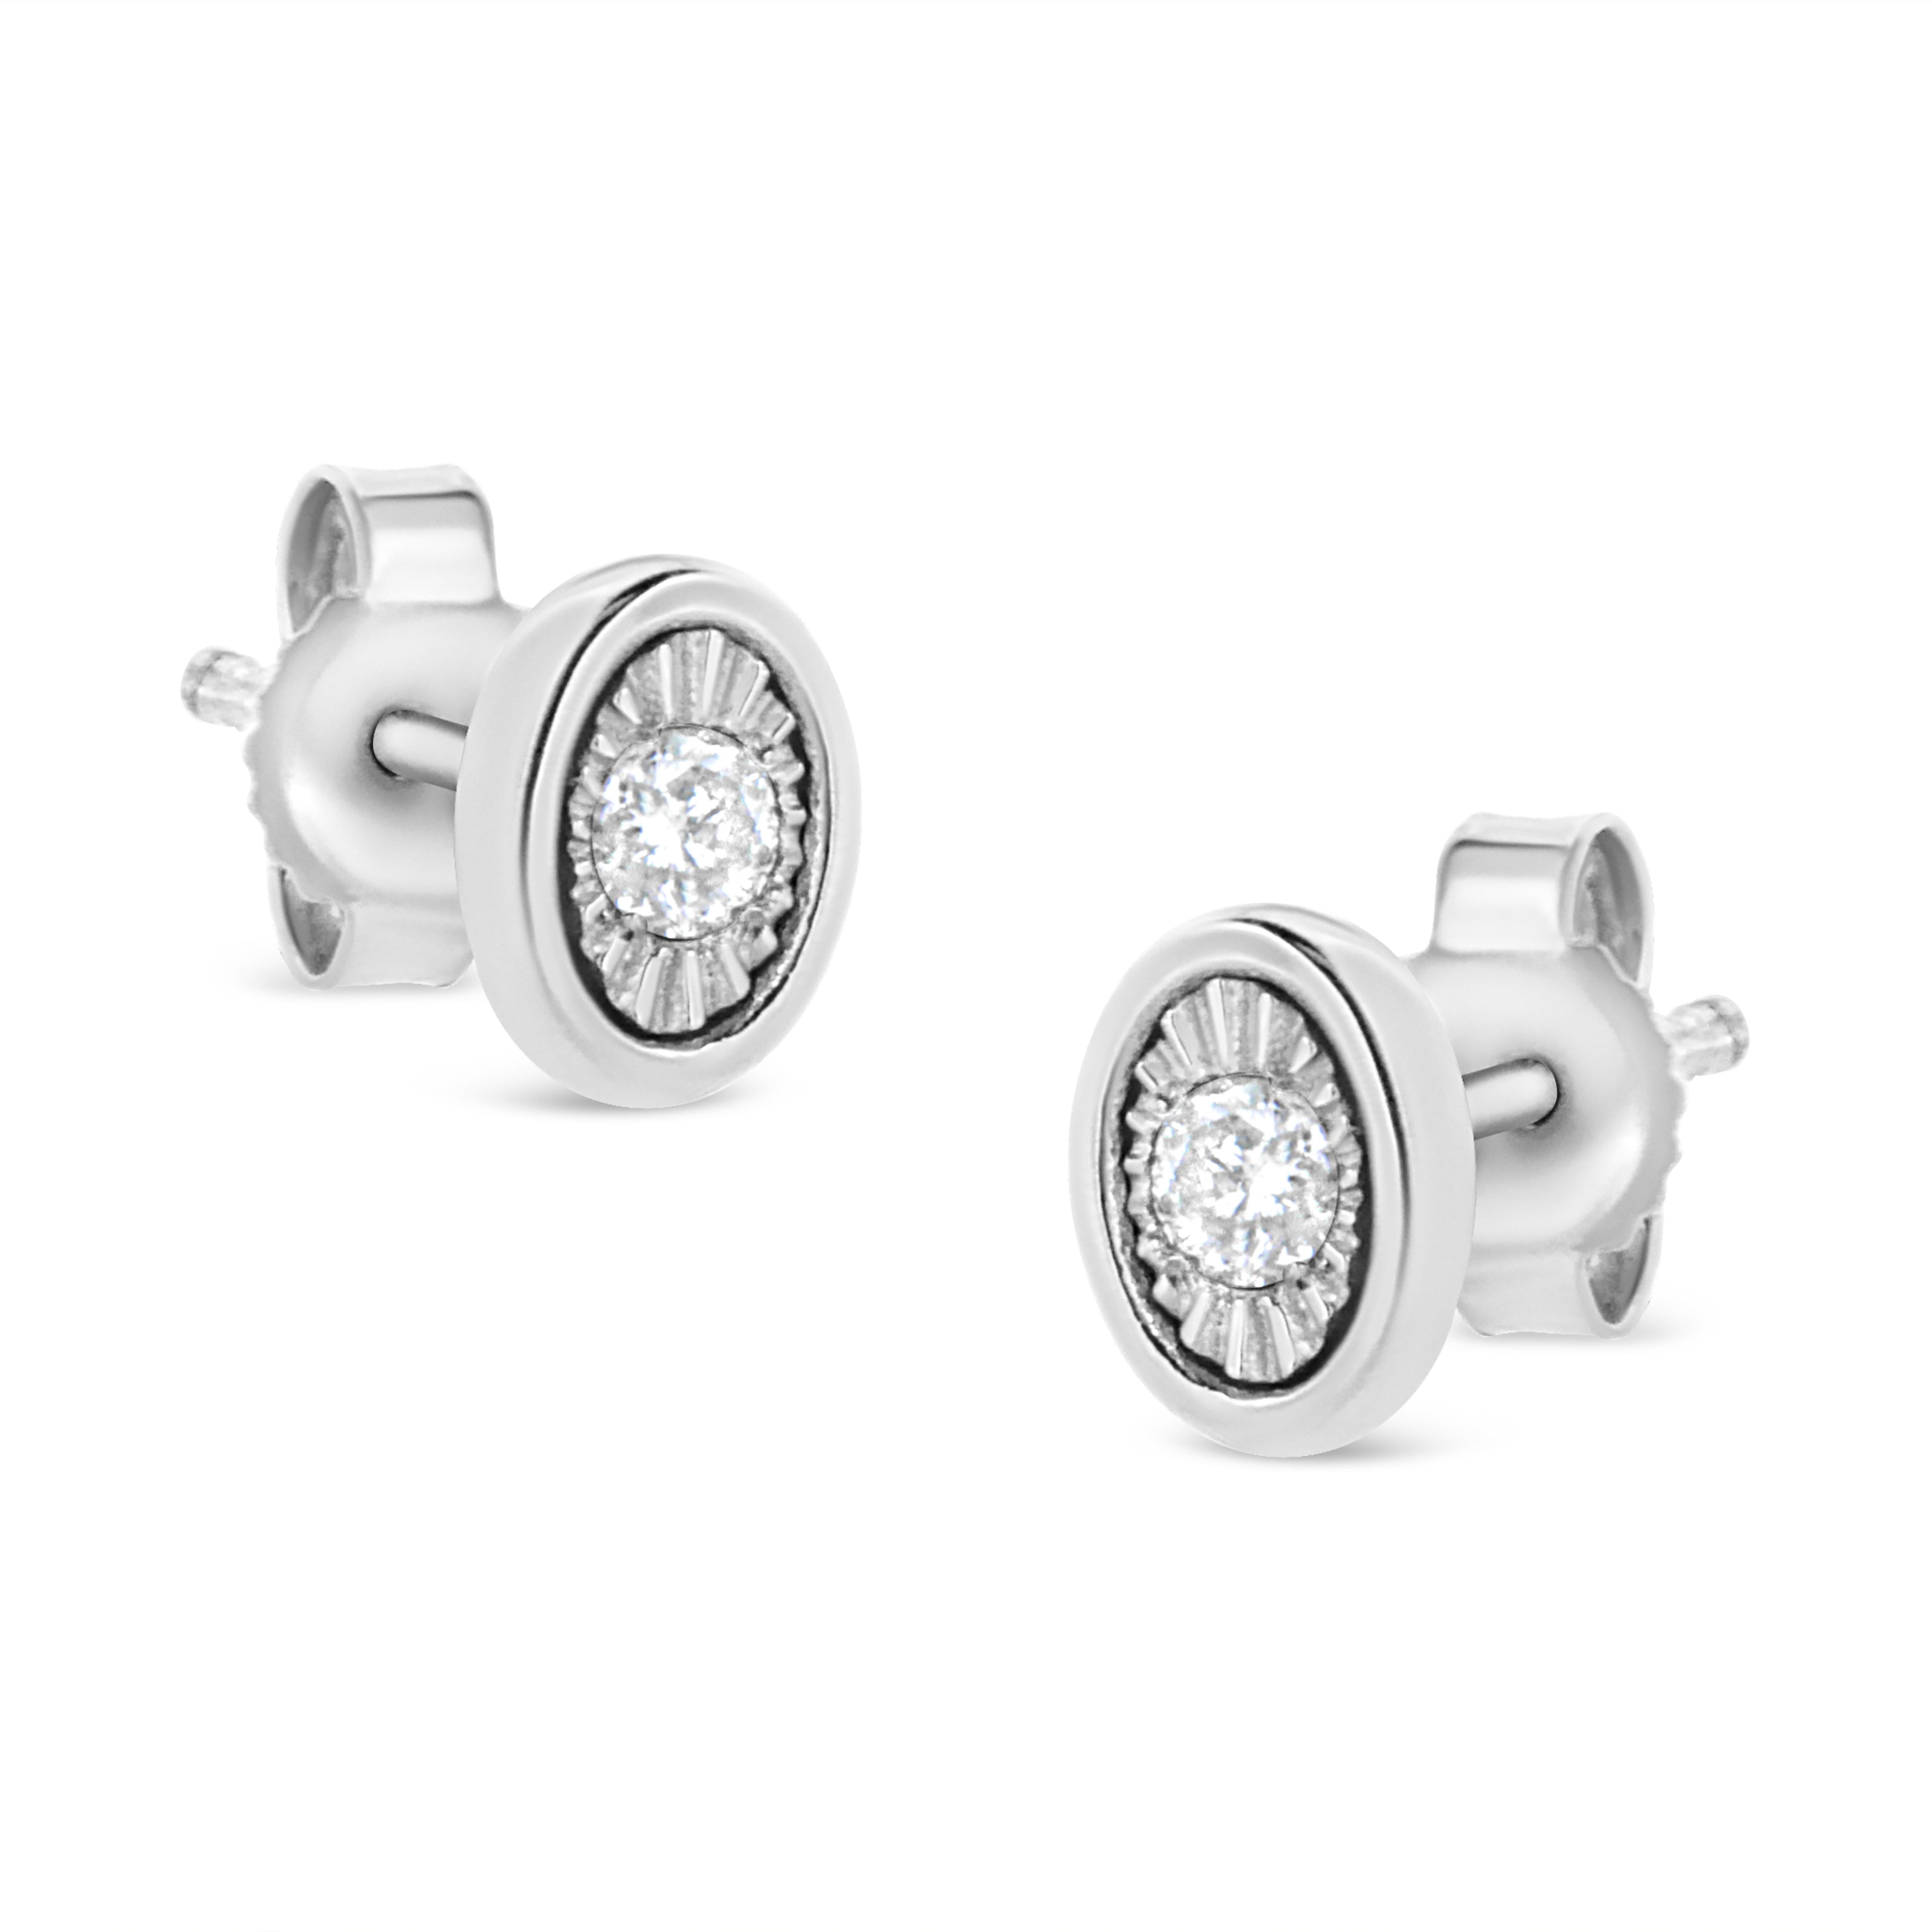 These oval shaped stud earrings are crafted in .925 sterling silver and feature 1/10ct TDW of diamonds. Each earring features a single sparkling round cut diamond in a miracle setting that adds to the earrings' sparkle. A polished silver halo